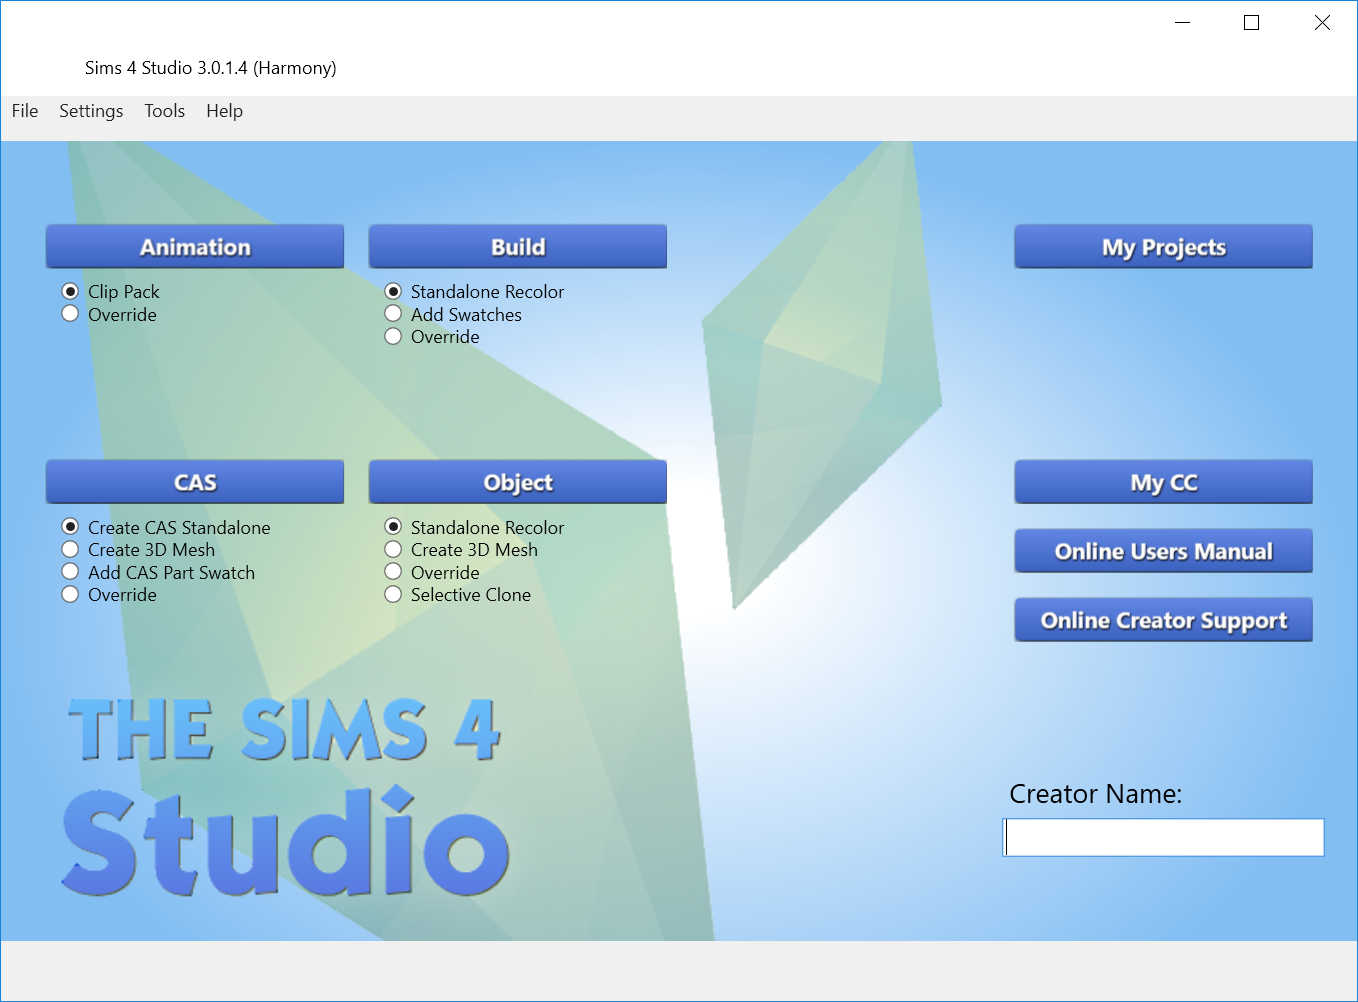 Creating Sims 4 CC on a Mac – Sims 4 Studio now available